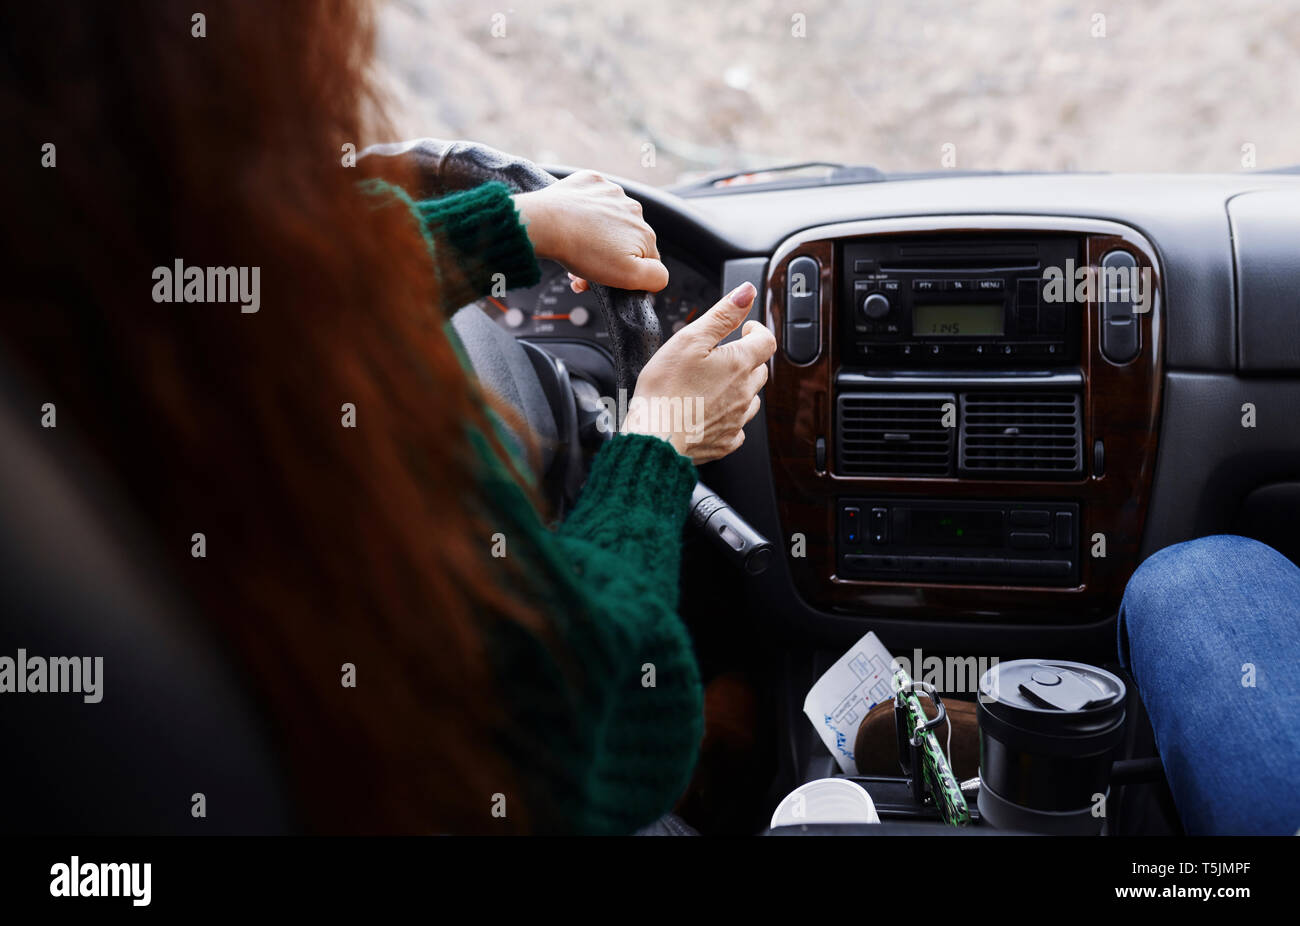 Back view of woman driving car on mountian road Stock Photo